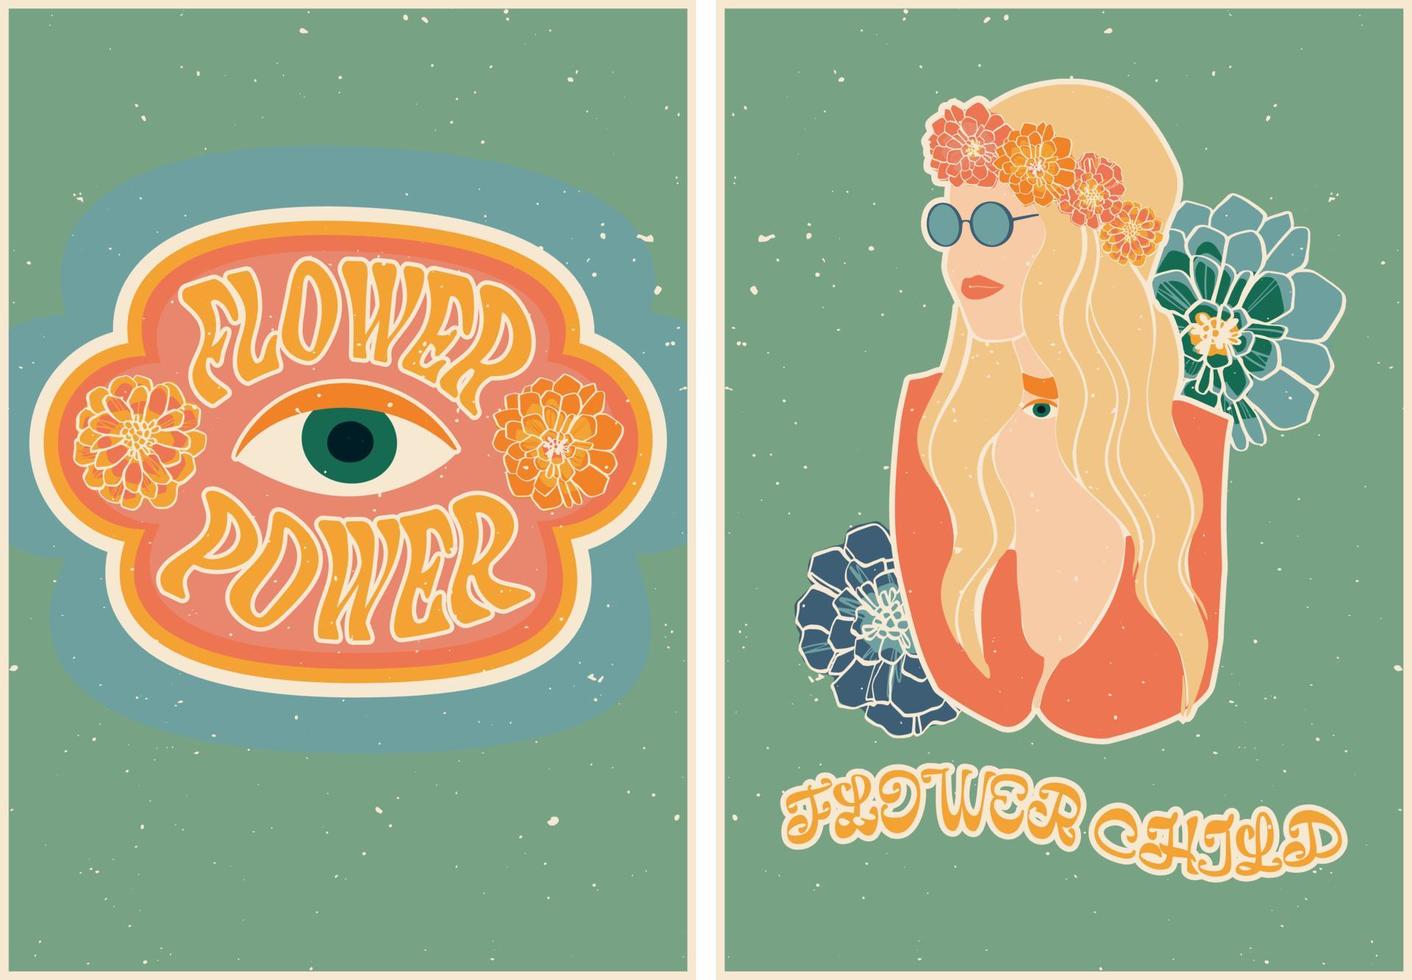 Set of posters in retro style with a hippie girl and flowers. Eye symbol in flowers. Vintage retro style. Psychedelic wallpaper. 60s, 70s, hippies. Set of postcard, poster design. vector